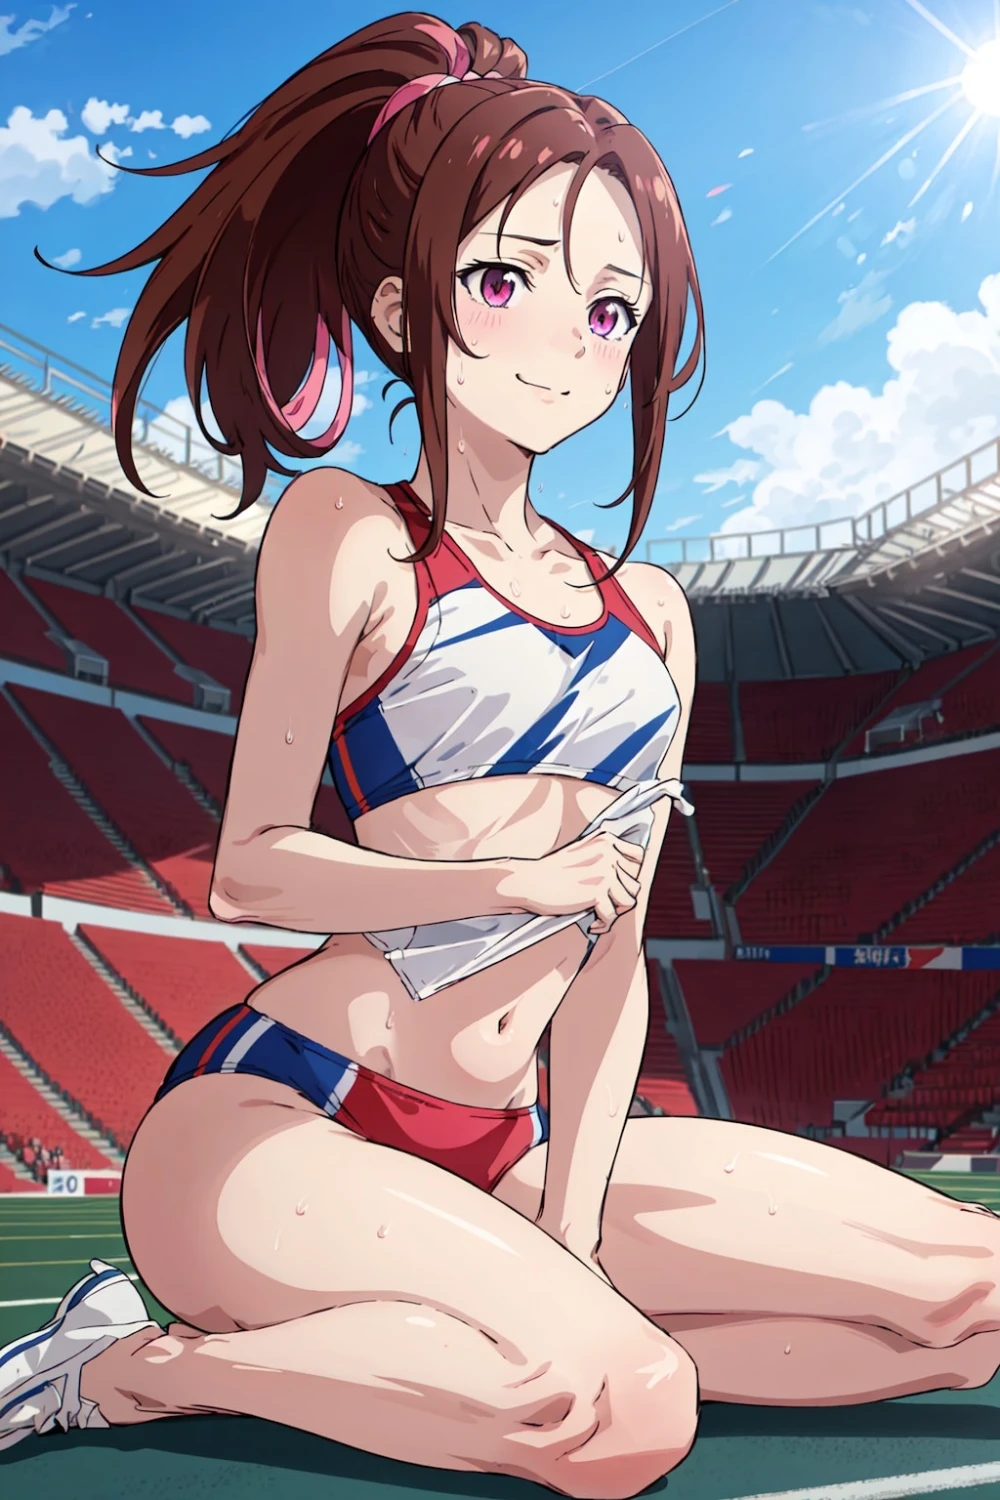 sports-anime-style-all-ages-30